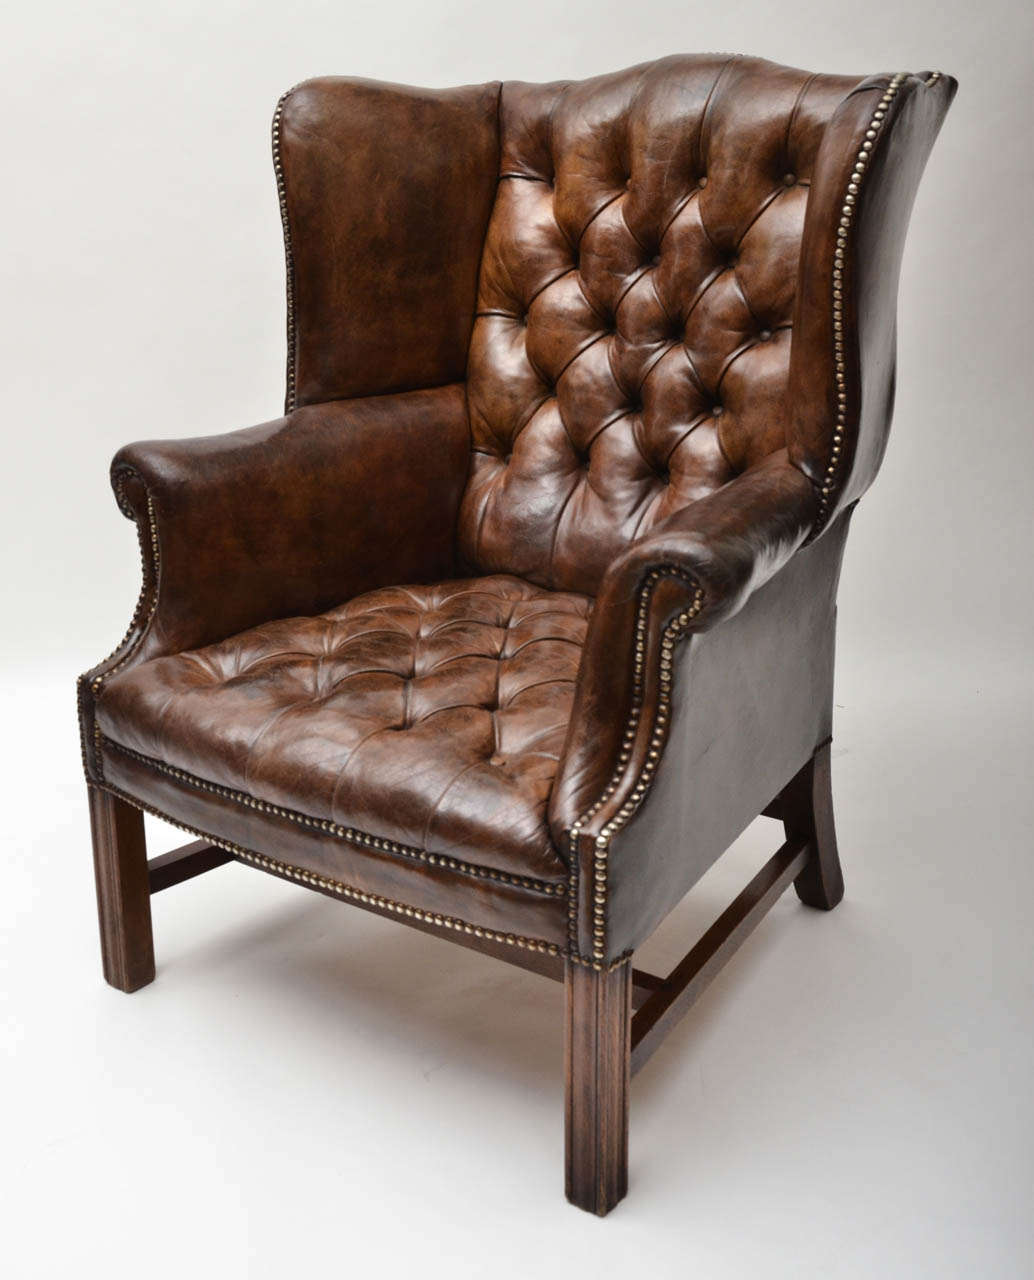 A 19th Century wing chair, original leather with tufted button-back and seat and original brass studs.